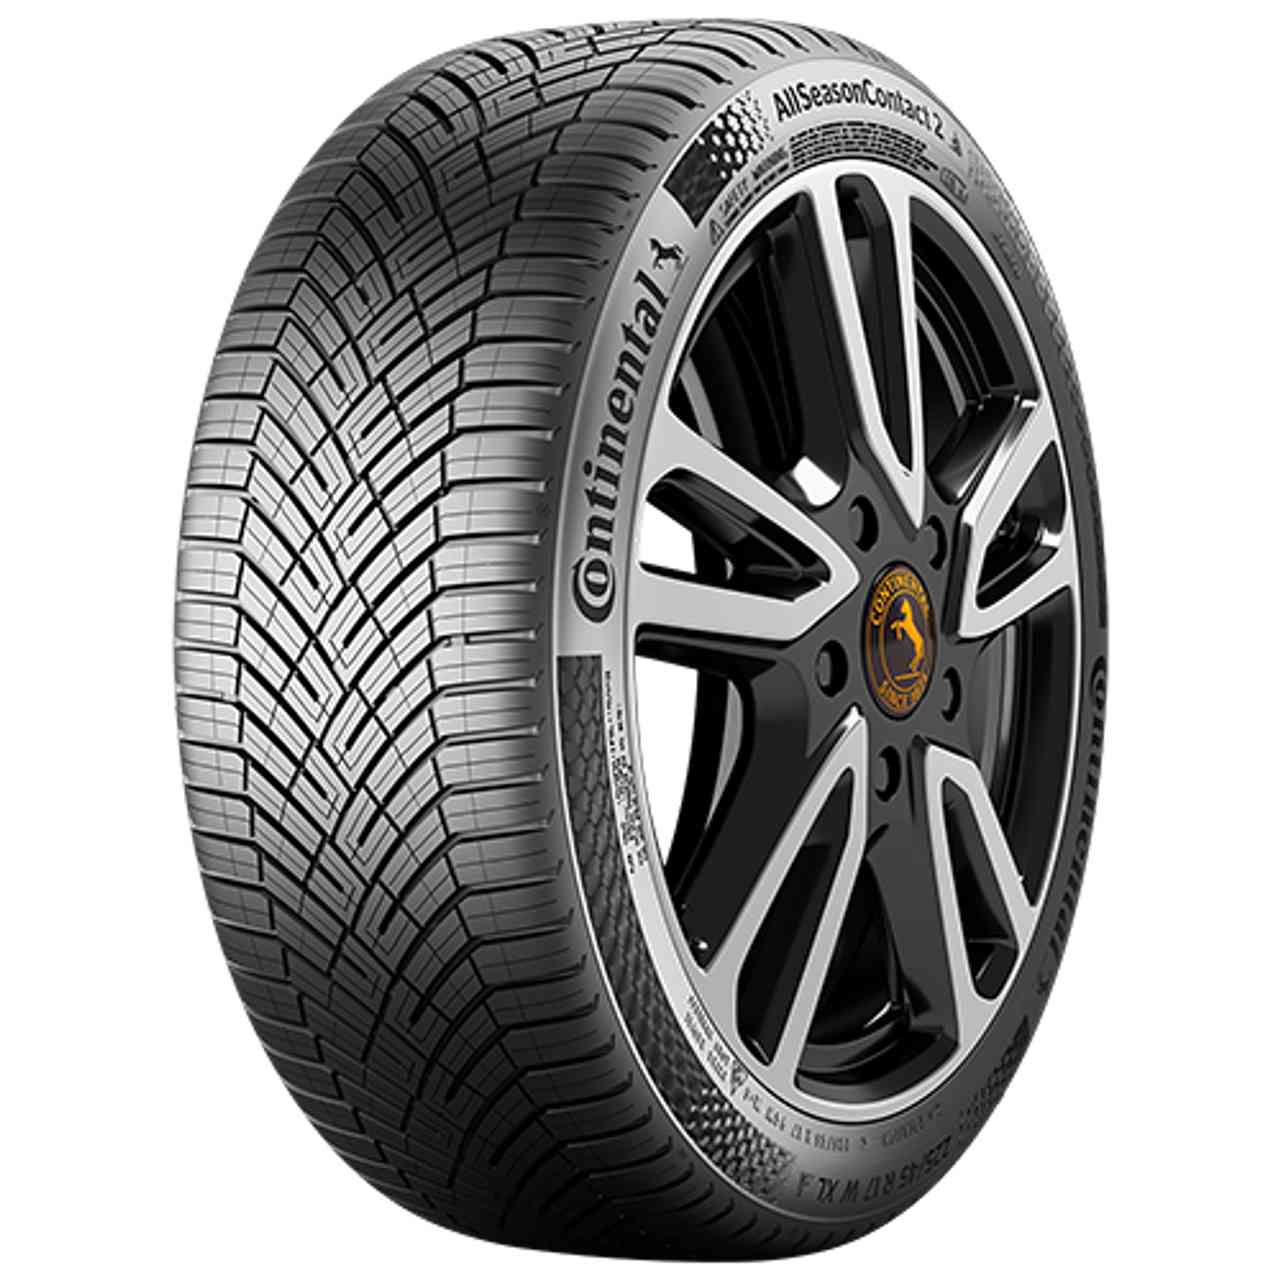 CONTINENTAL ALLSEASONCONTACT 2 (EVc) 215/55R17 94V BSW